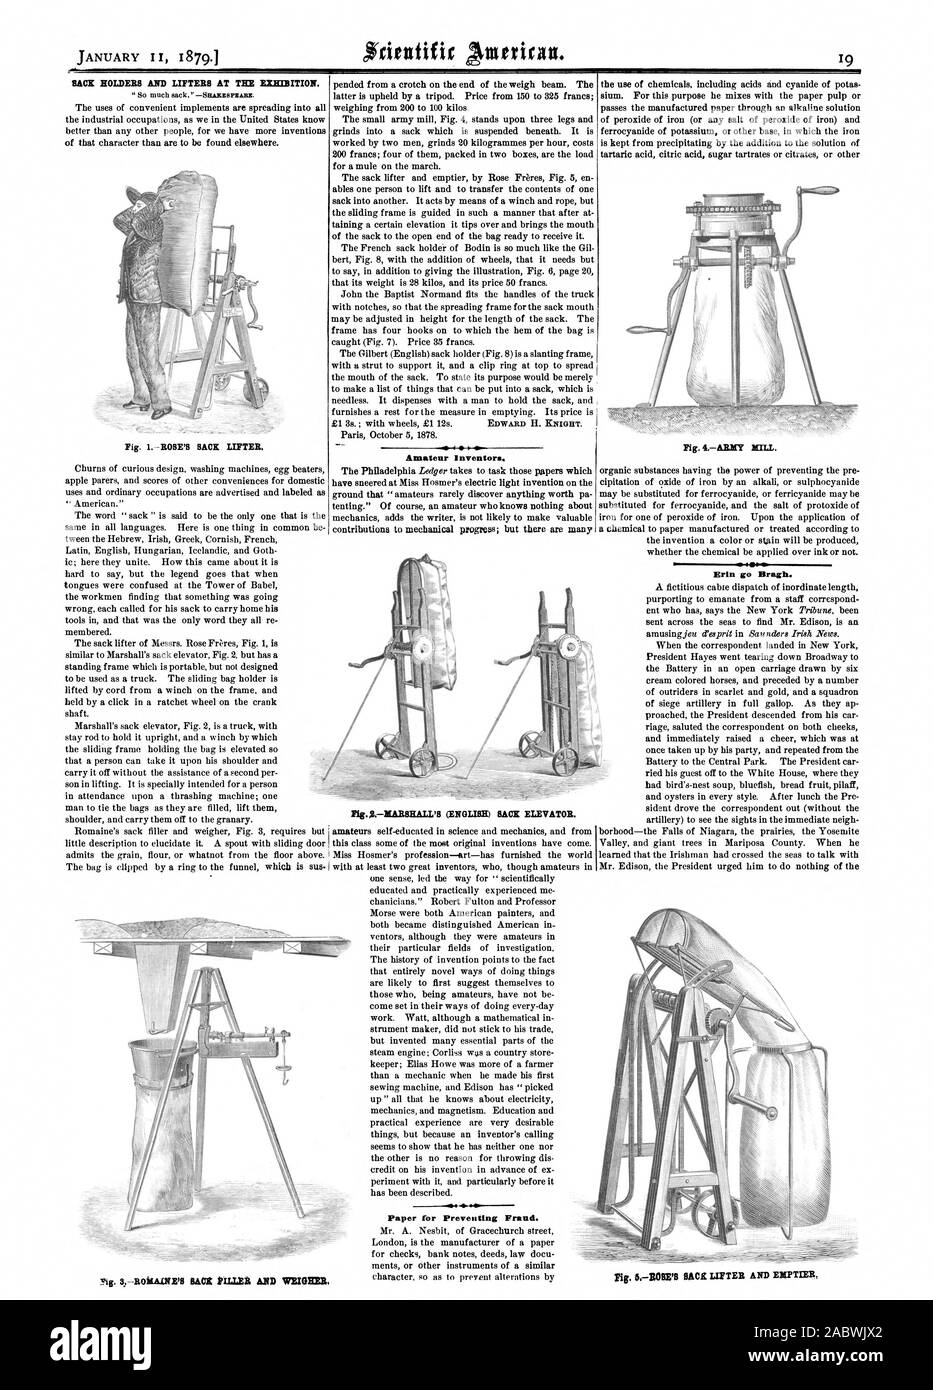 SACK HOLDERS AND LIFTERS AT TER EXHIBITION. Fig. 1ROSE'S SACK LIFTER. Amateur Inventors. Fig.BMARSHALL'S (ENGLISH) SACK ELEVATOR. Paper for Preventing Fraud. Fig. 4ARMY MILL. A fictitious cabte dispatch of inordinate length purporting to emanate from a staff correspond-, scientific american, 1879-01-11 Stock Photo